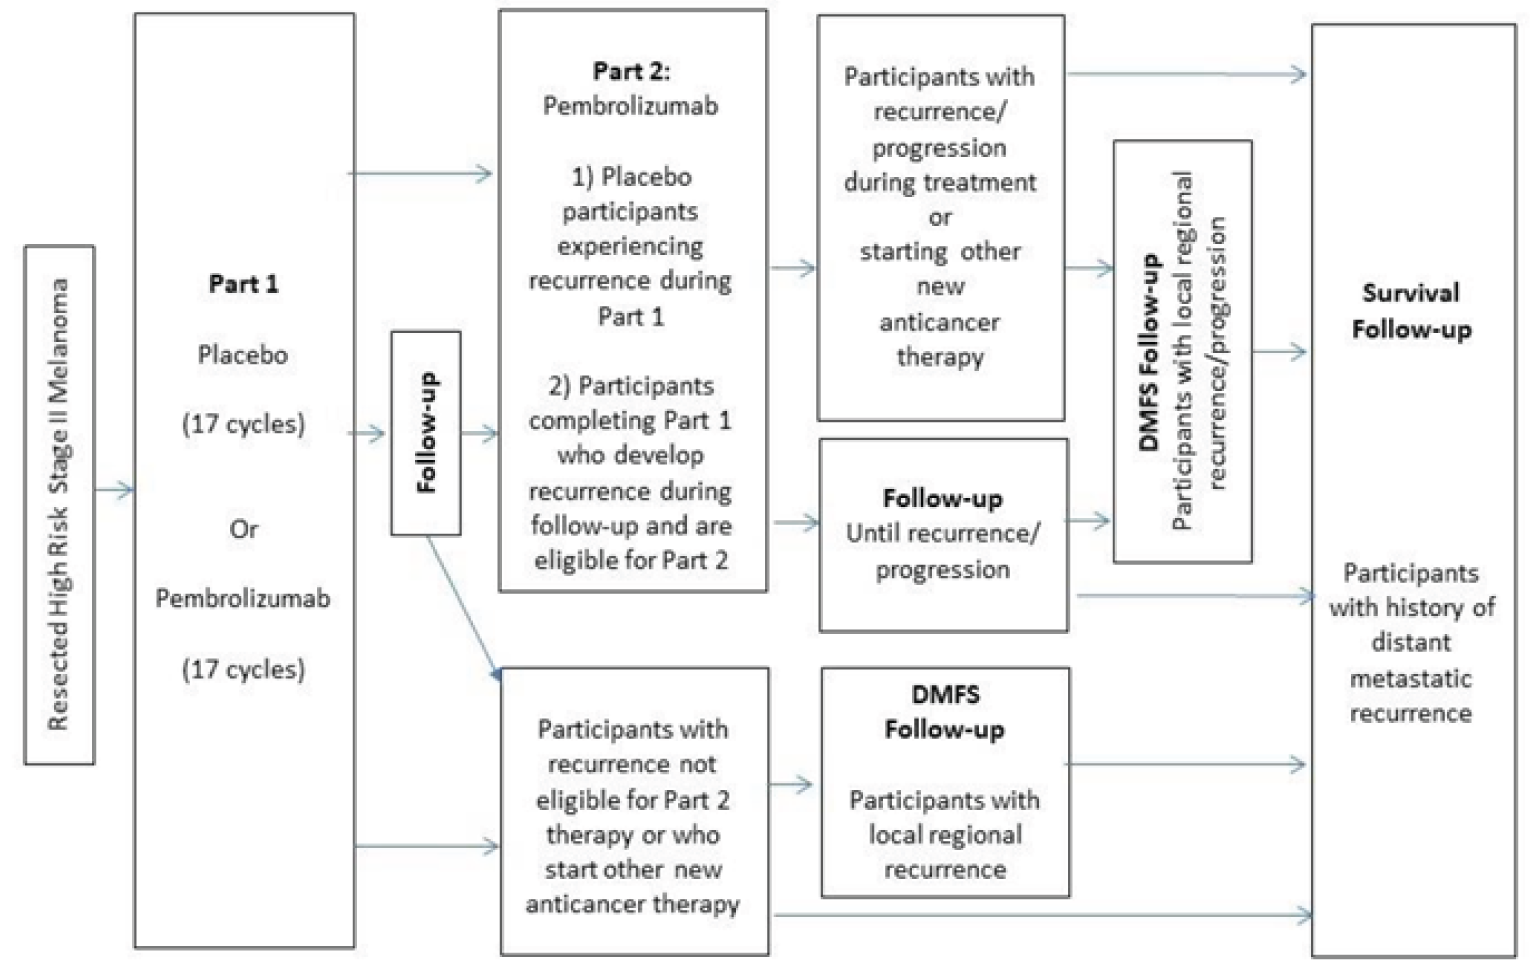 A flow chart of the KEYNOTE-716 study from part 1 to survival follow-up. The study consisted of 2 parts: adjuvant treatment in part 1 and crossover and rechallenge after first recurrence in part 2. Throughout the study, patients were followed to observe recurrence or progression, DMFS, and survival.